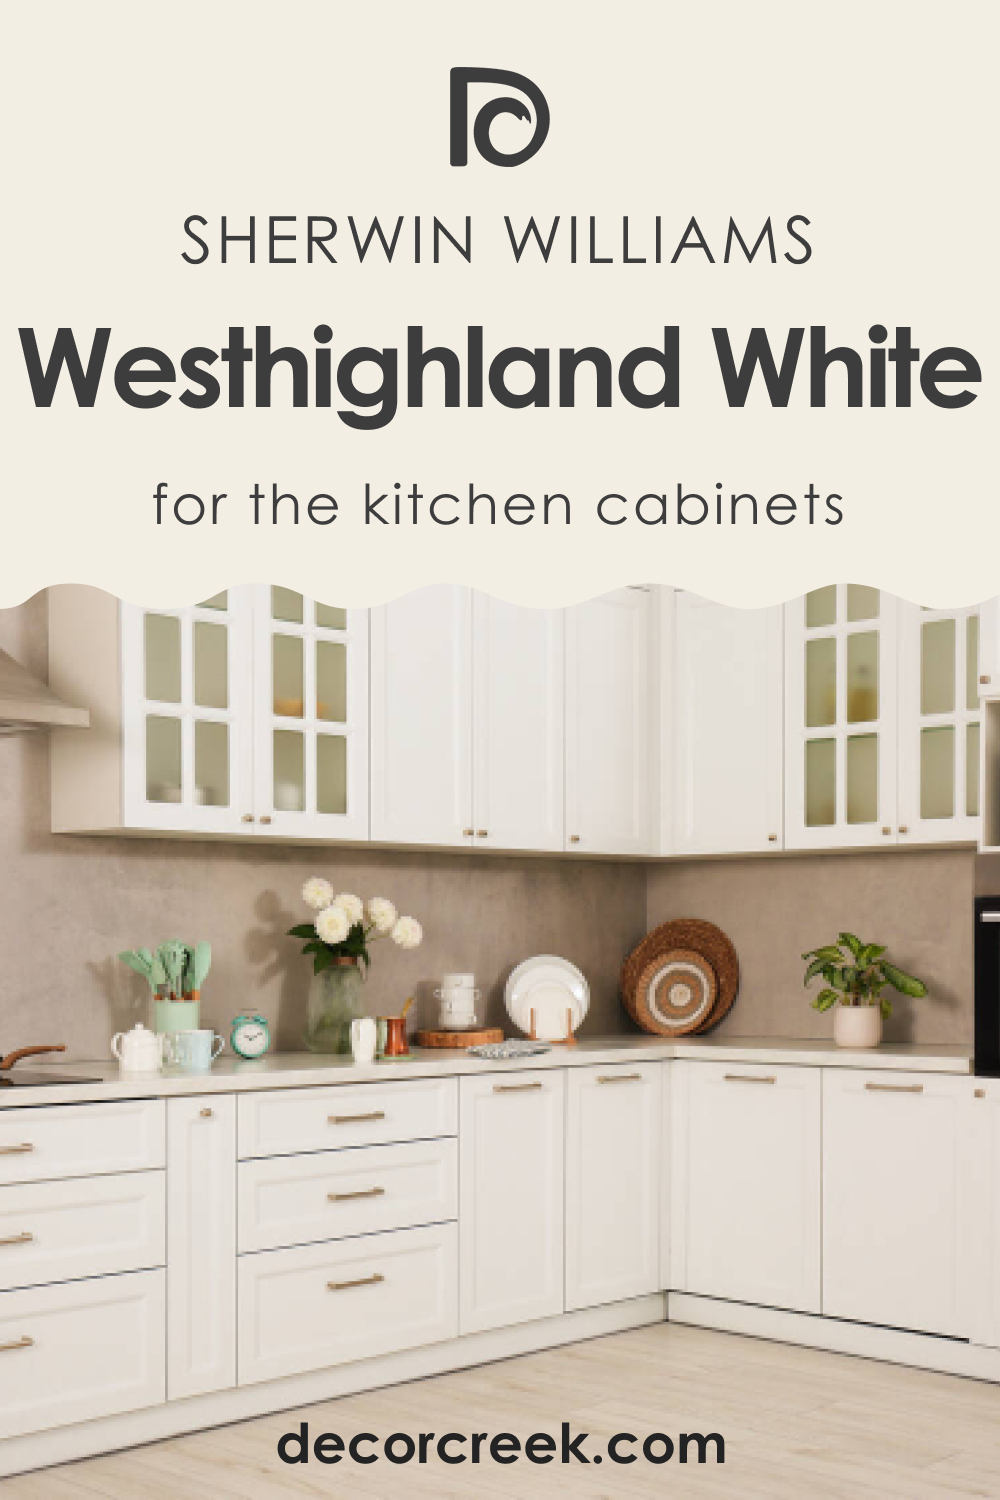 How to Use SW 7566 Westhighland White for the Kitchen Cabinets?